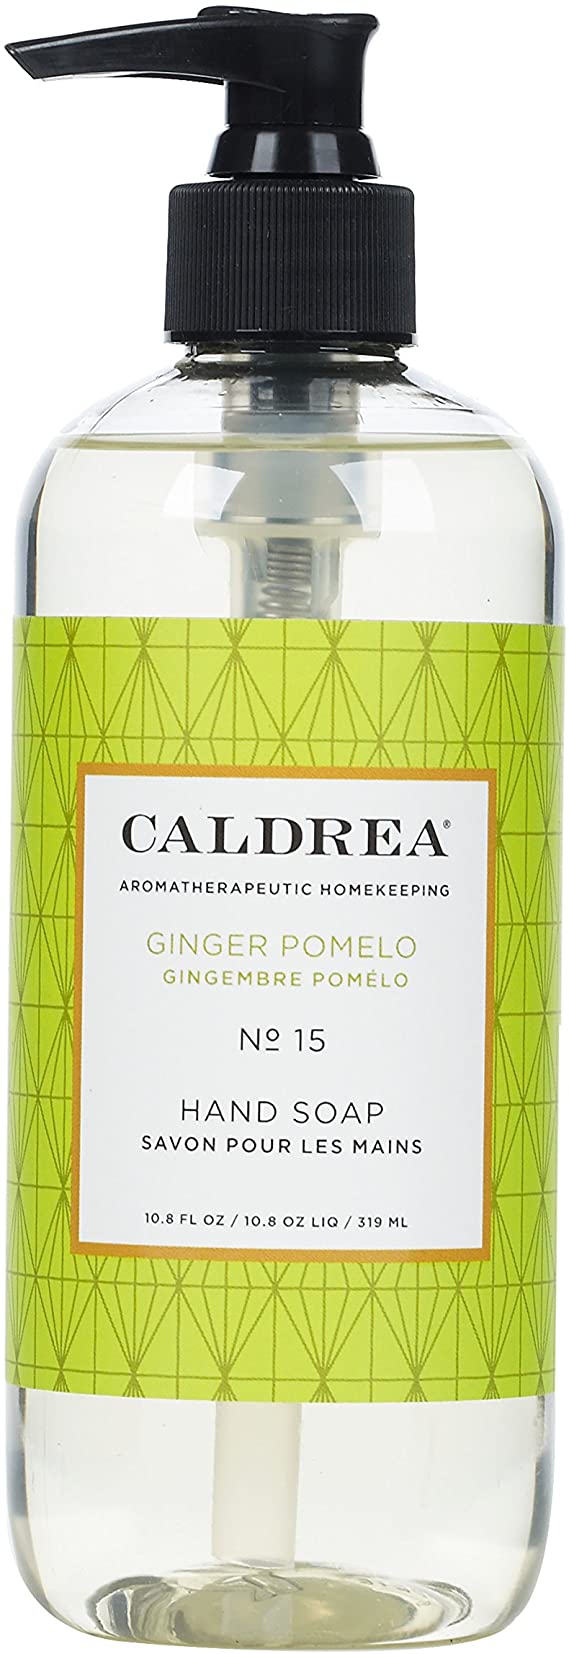 Caldrea Hand Wash Soap, Aloe Vera Gel, Olive Oil and Essential Oils to Cleanse and Condition, Ginger Pomelo Scent, 10.8 oz